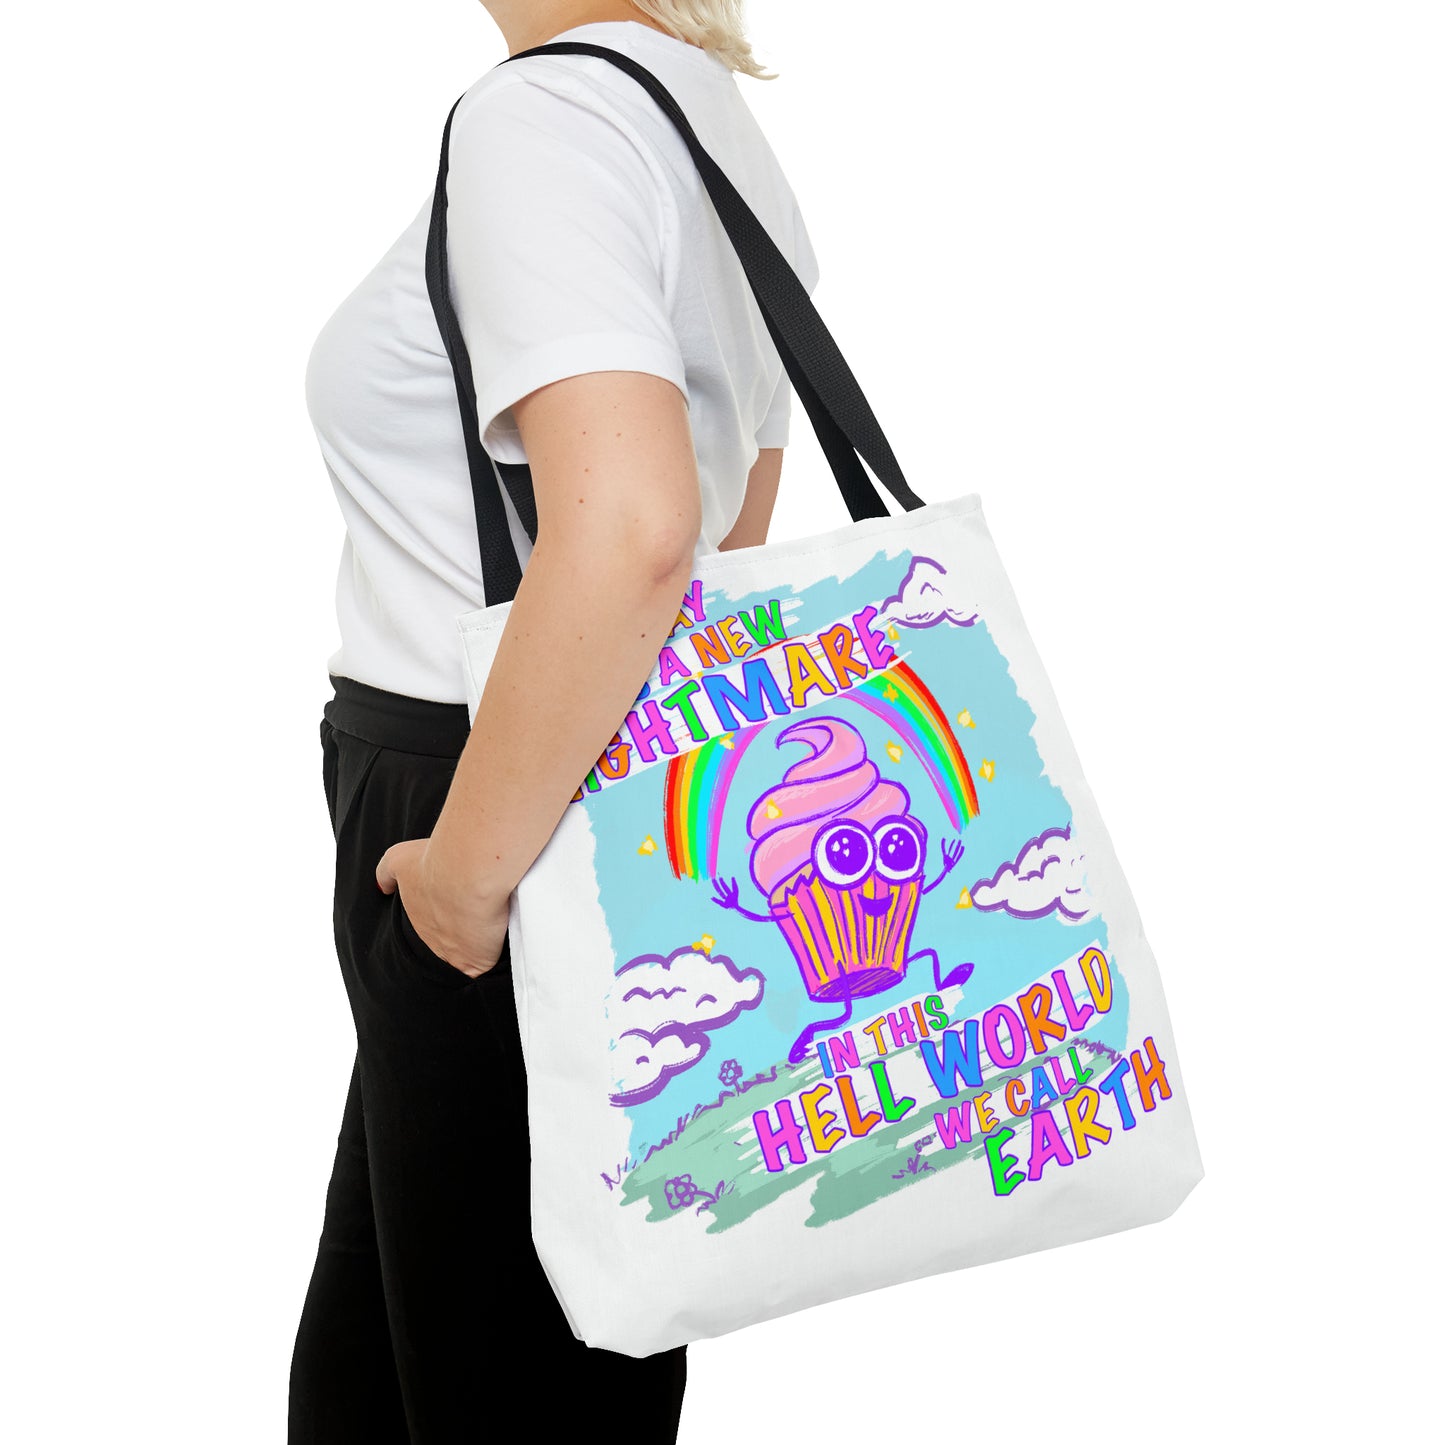 "Hell World" Tote